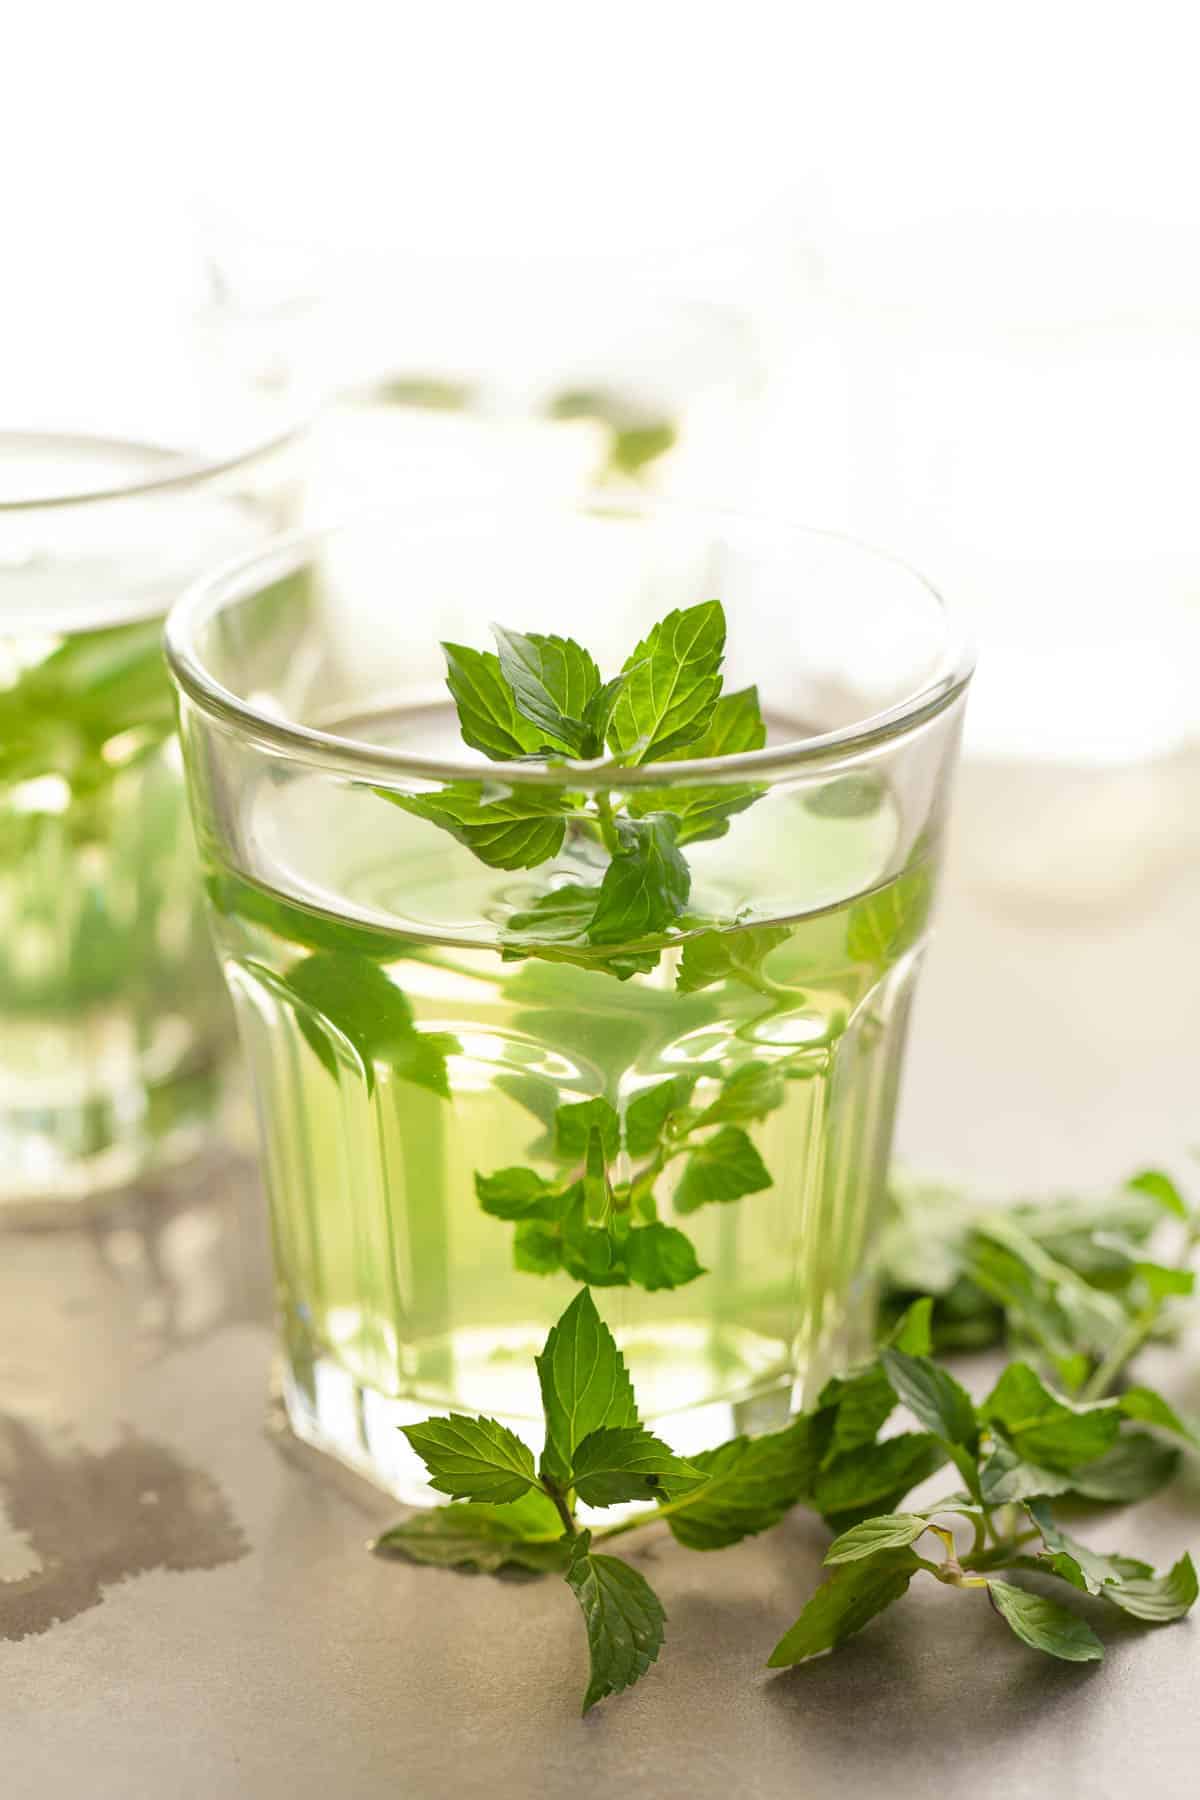 Make homemade mint tea with fresh peppermint leaves.